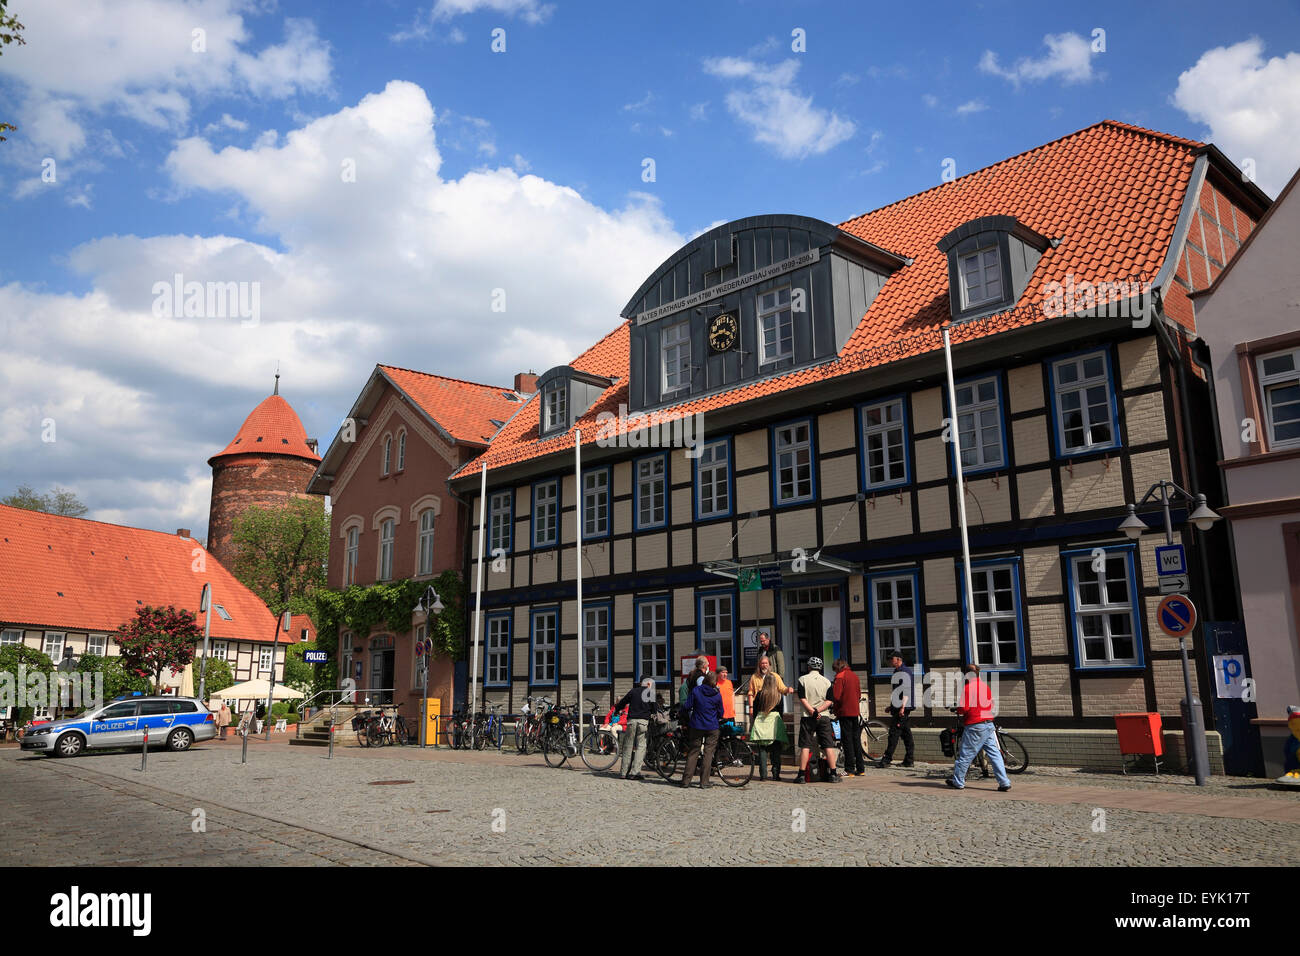 Biker group in front of town hall, Dannenberg, Wendland, Lower Saxony, Germany, Europe Stock Photo